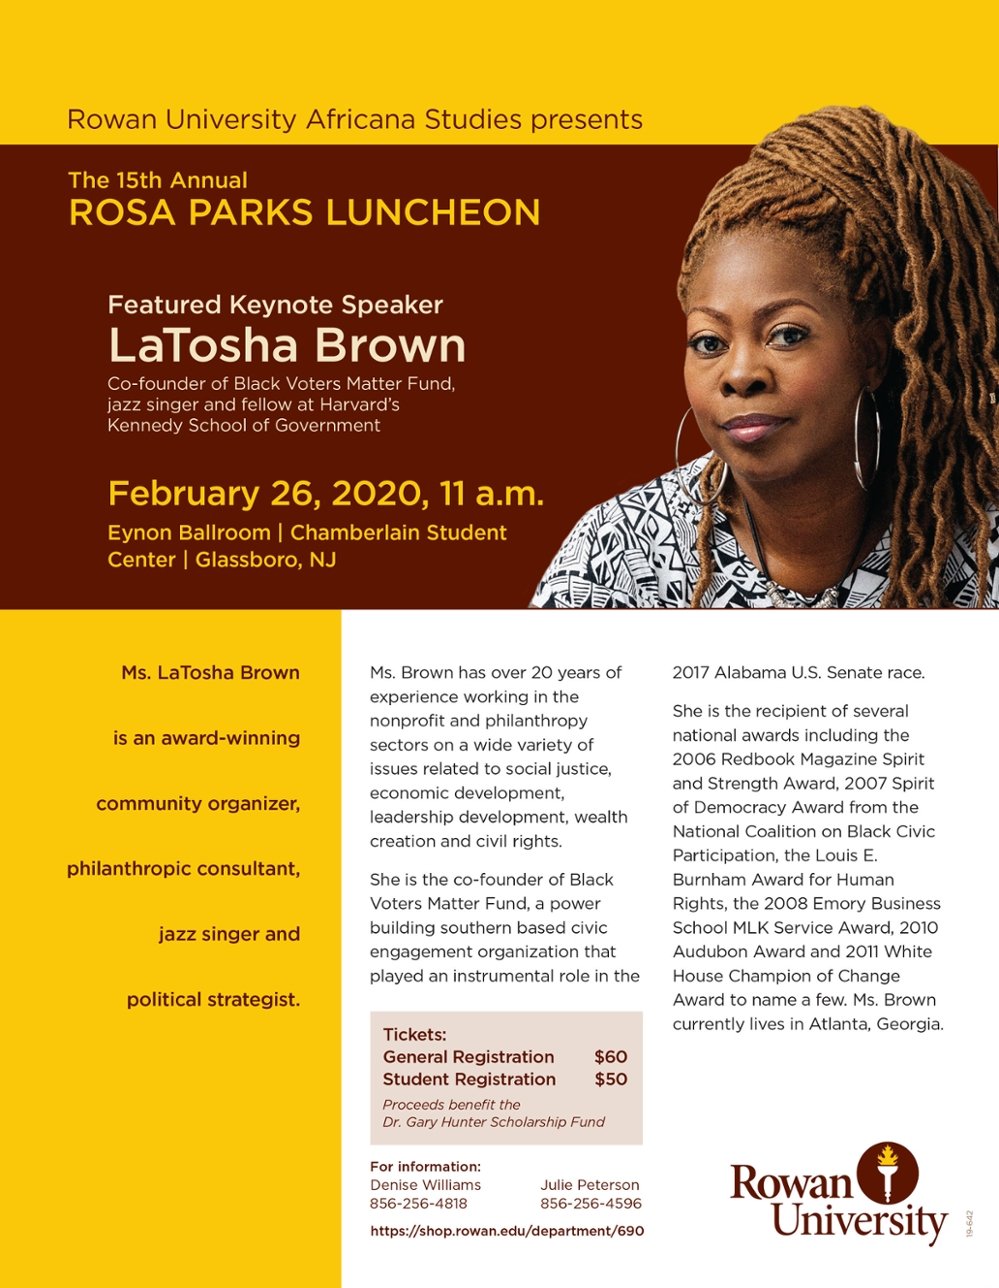 Rosa Parks Luncheon